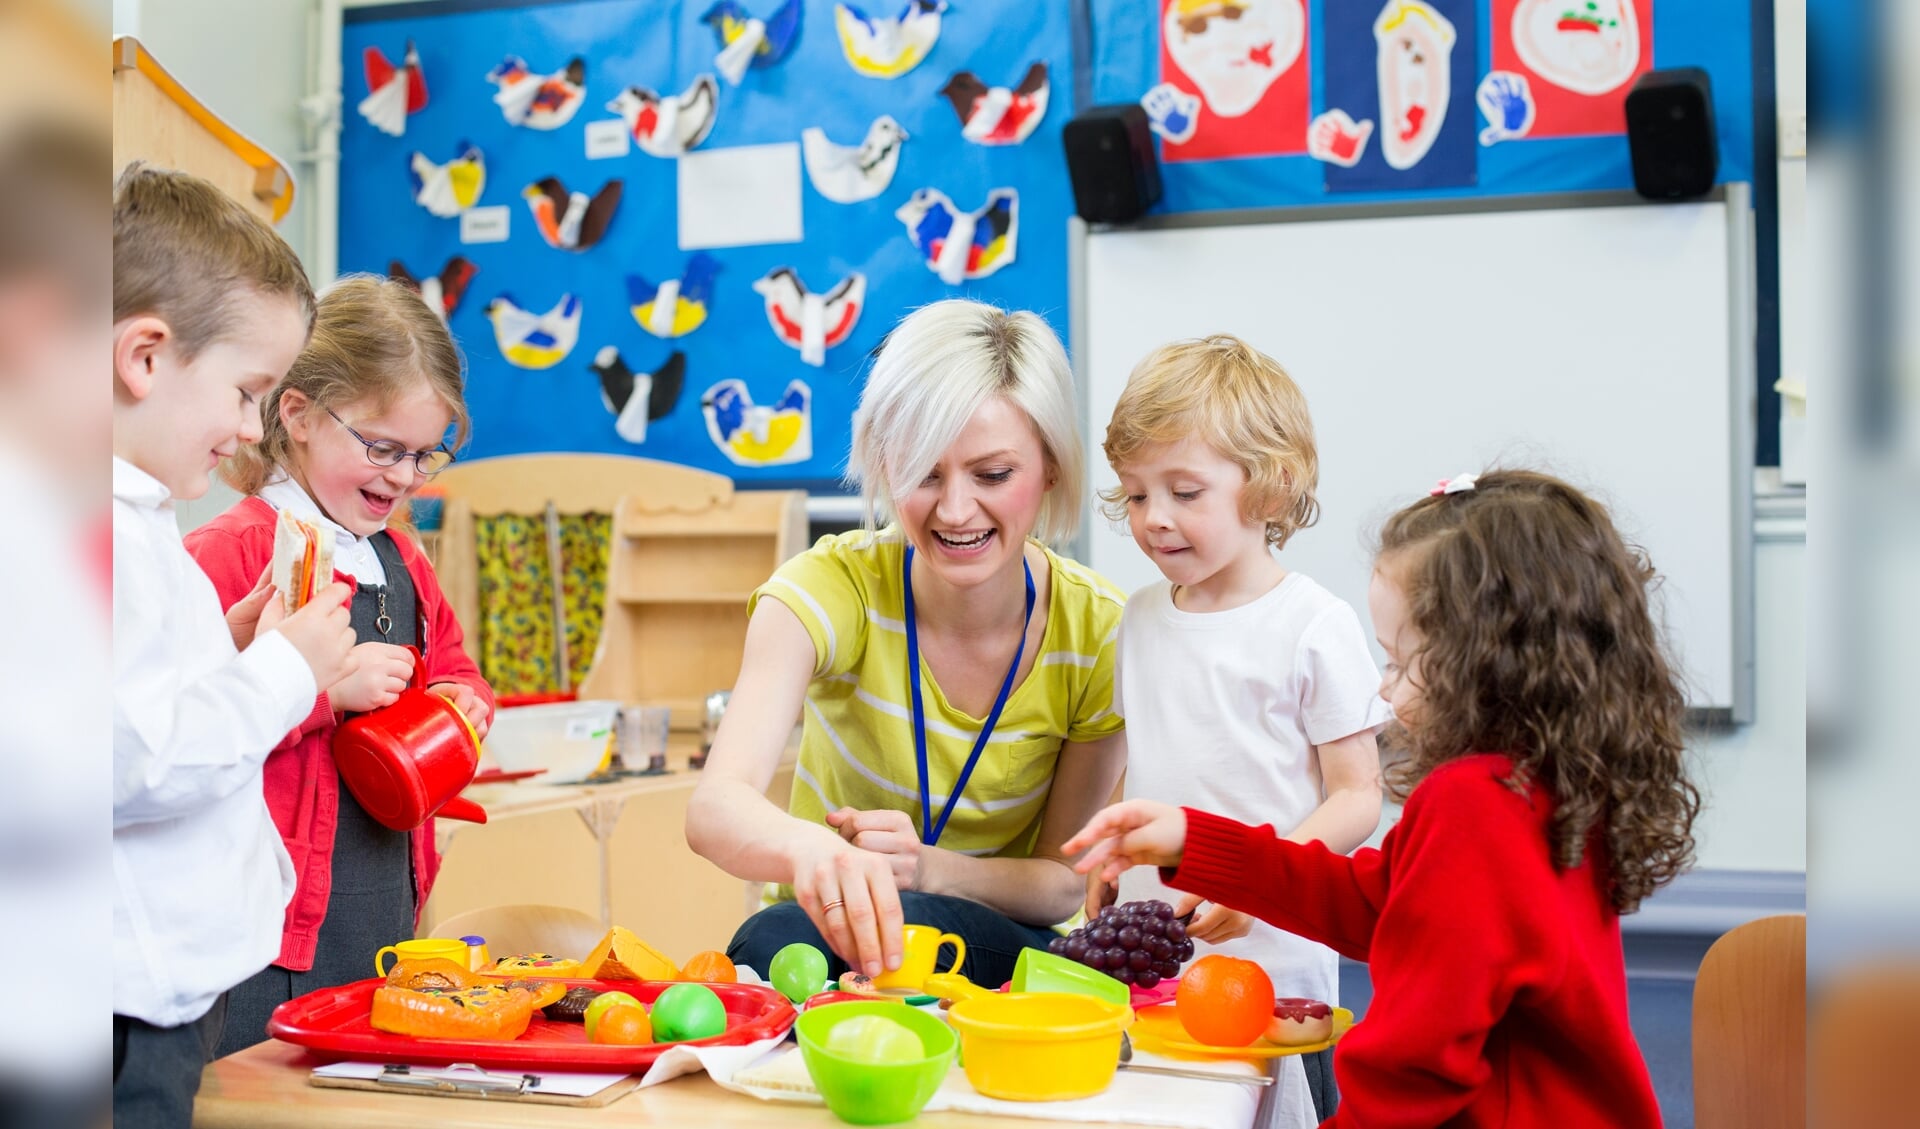 Nursery teacher playing kitchen roleplay with her students in the classroom.